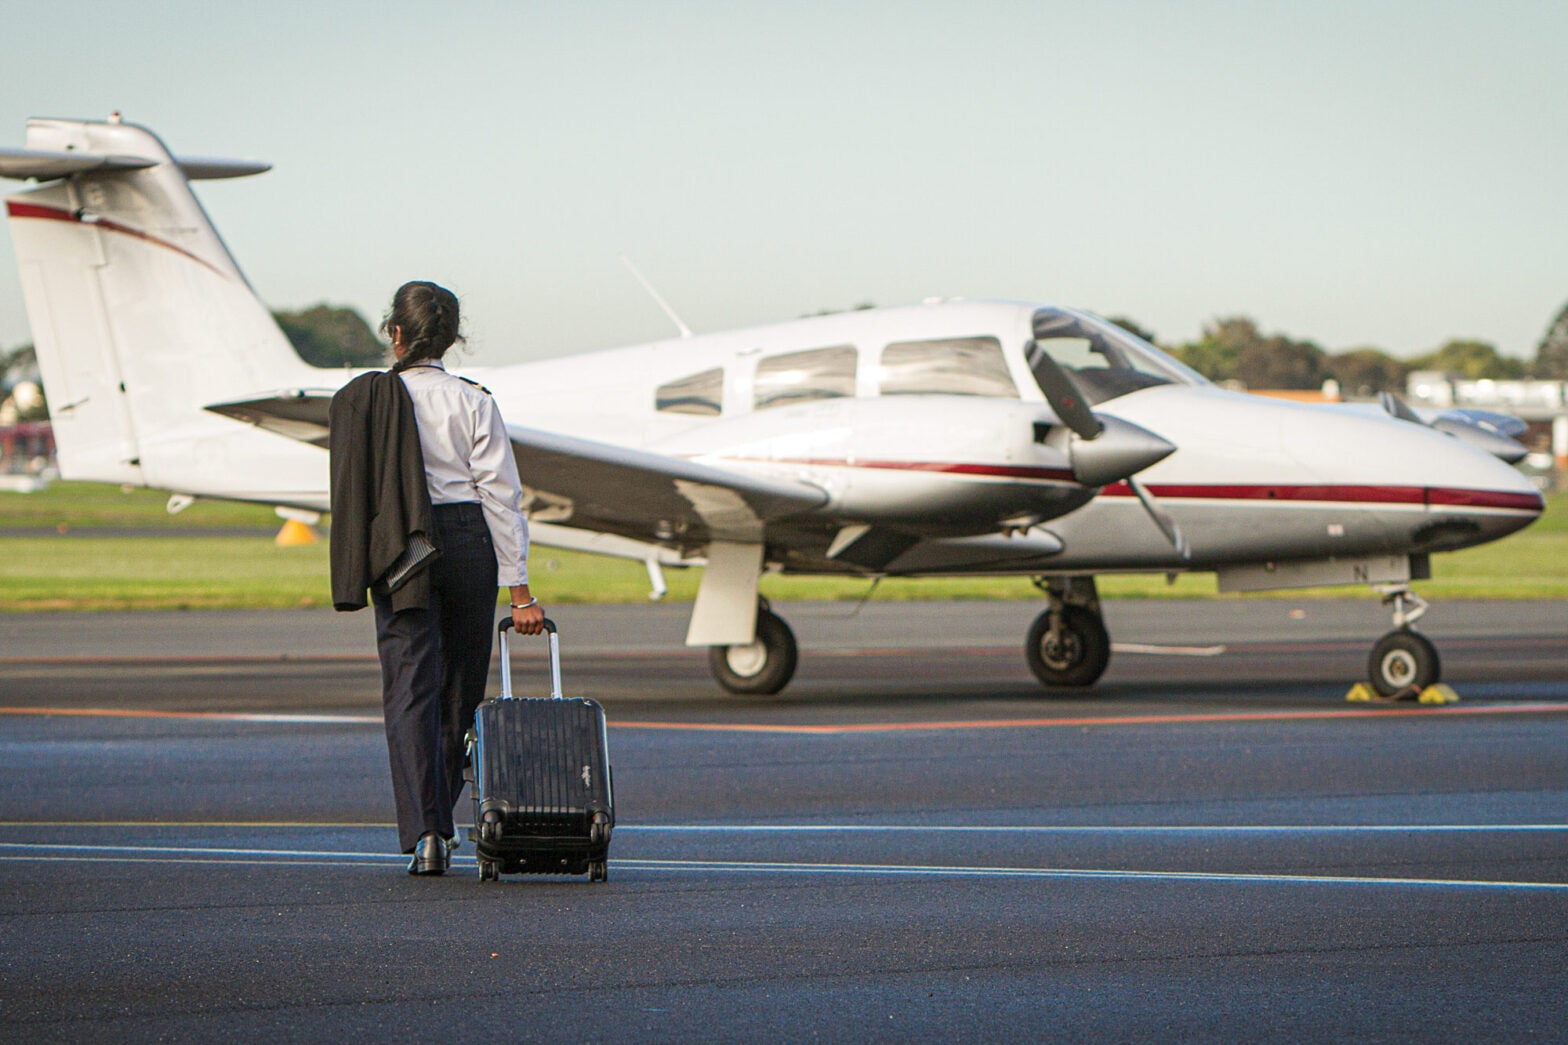 How to Become a Professional Pilot